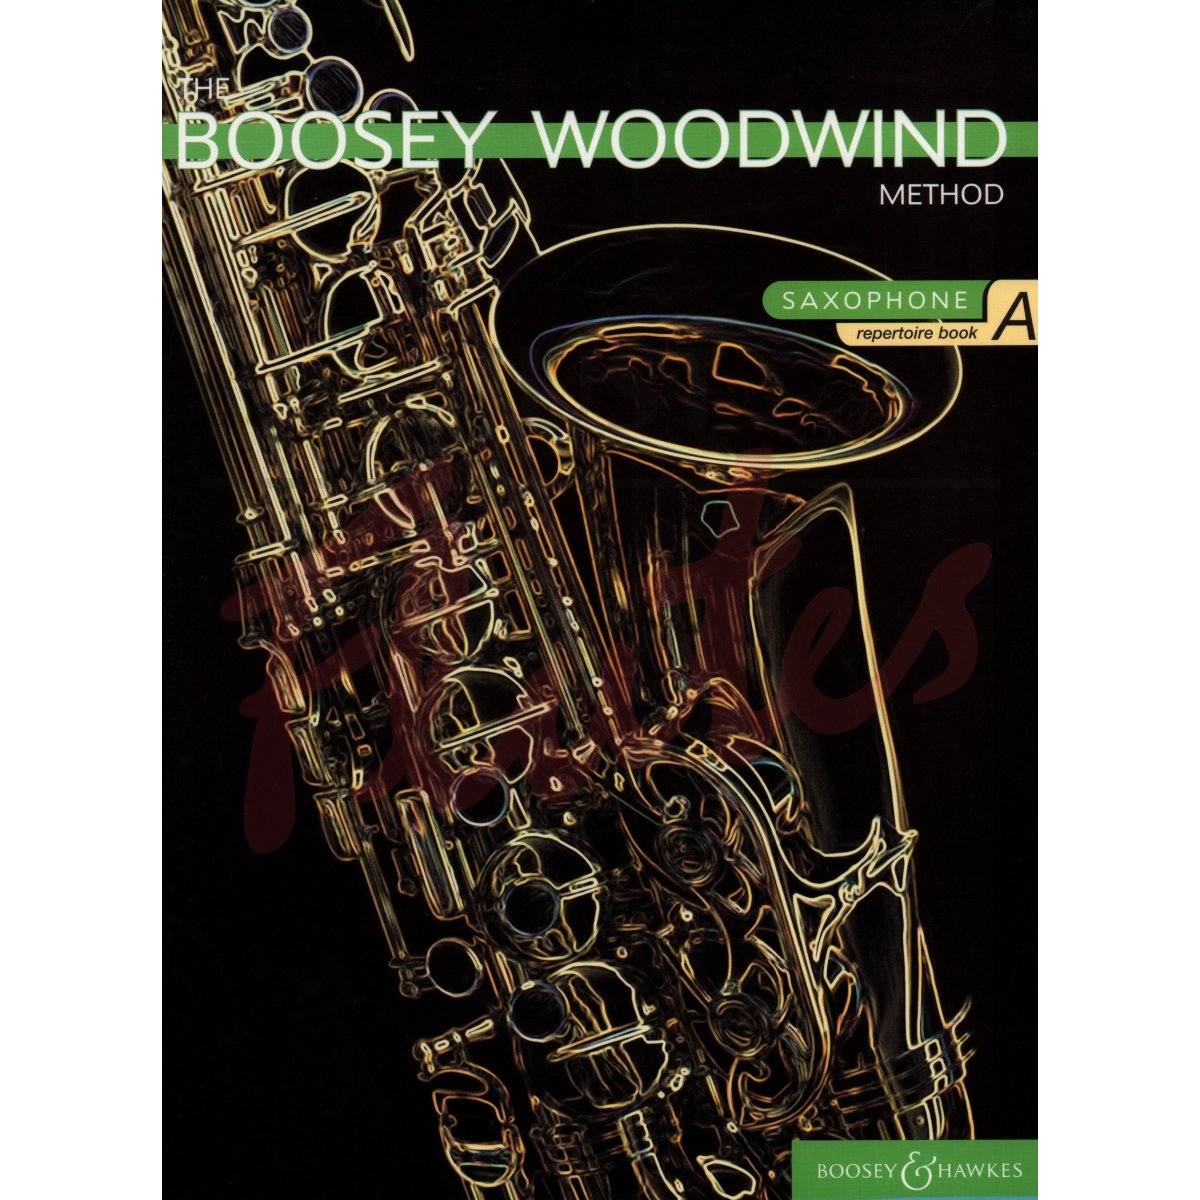 The Boosey Woodwind Method [Alto Sax] Repertoire Book A